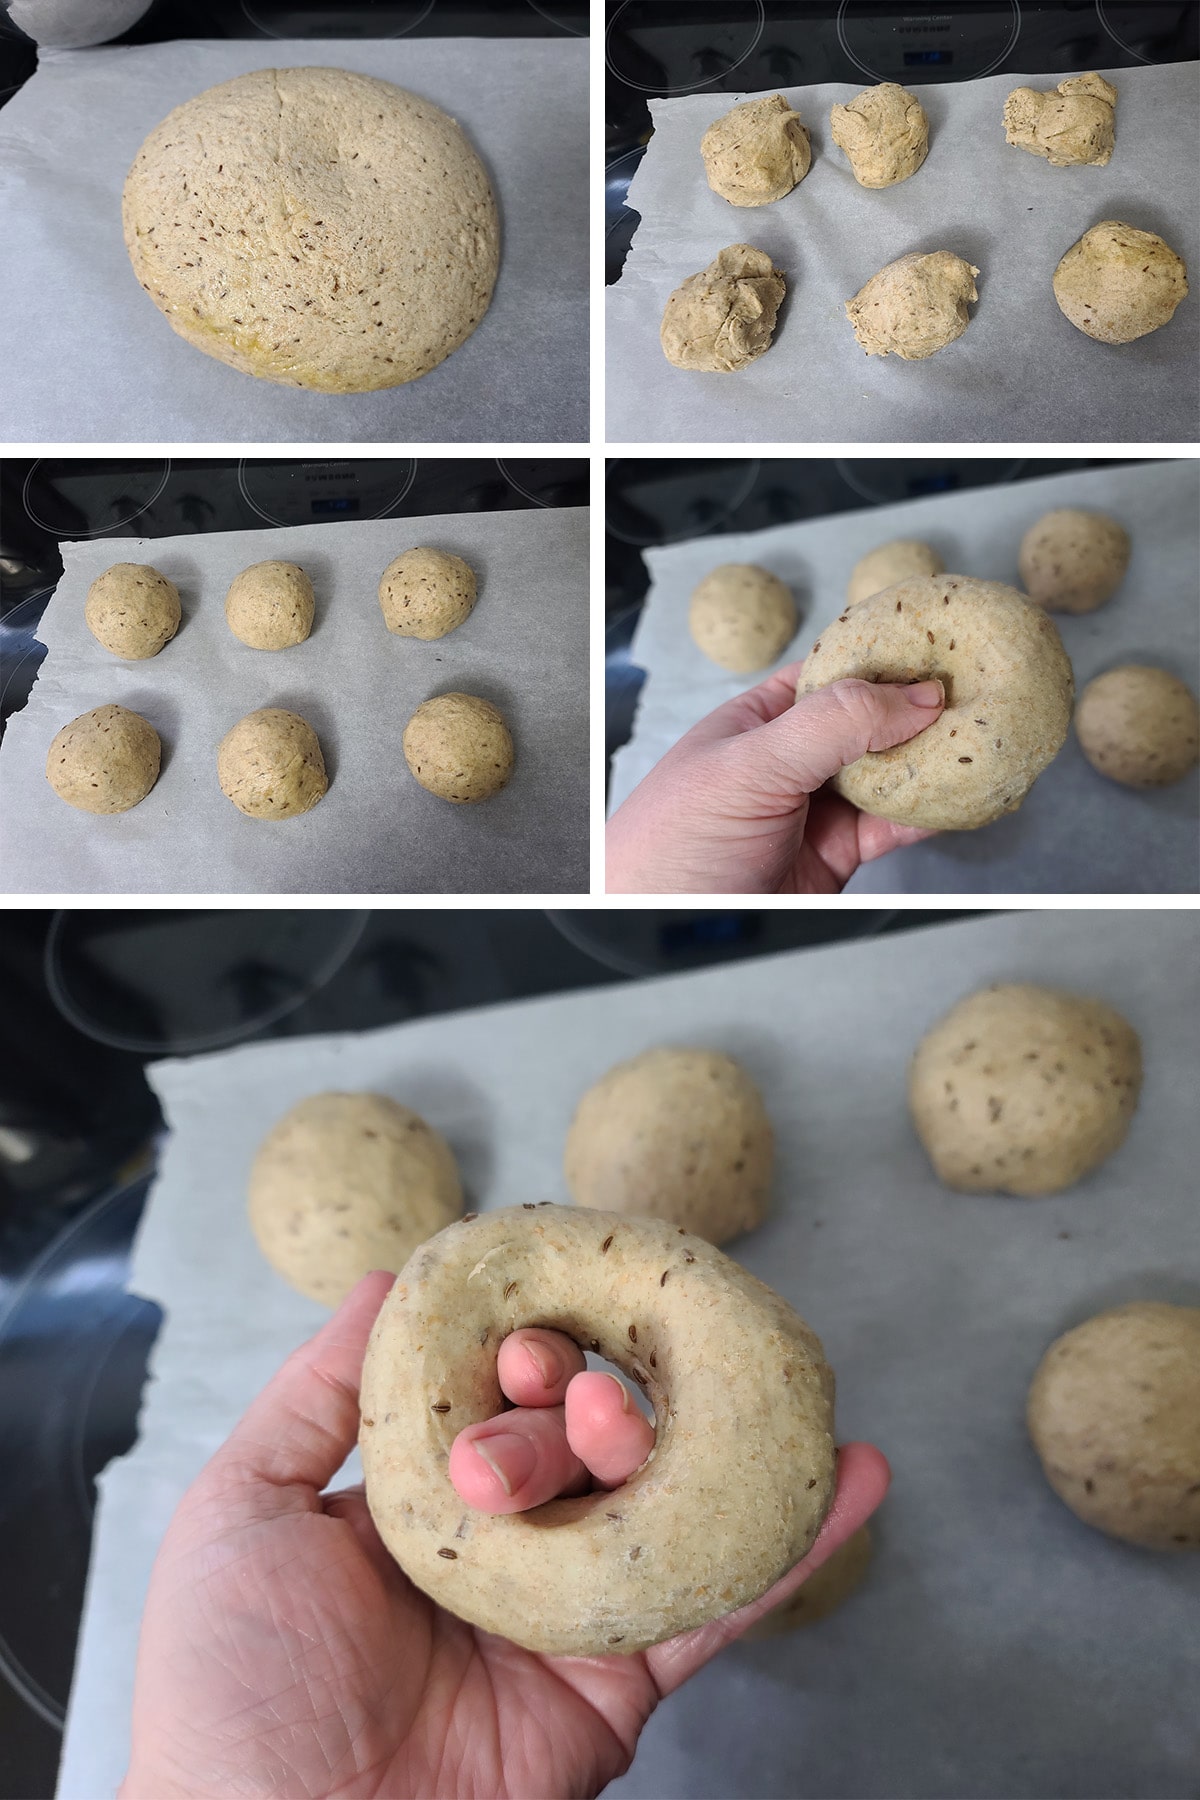 A 5 part image showing the dough being formed into bagels, as described.